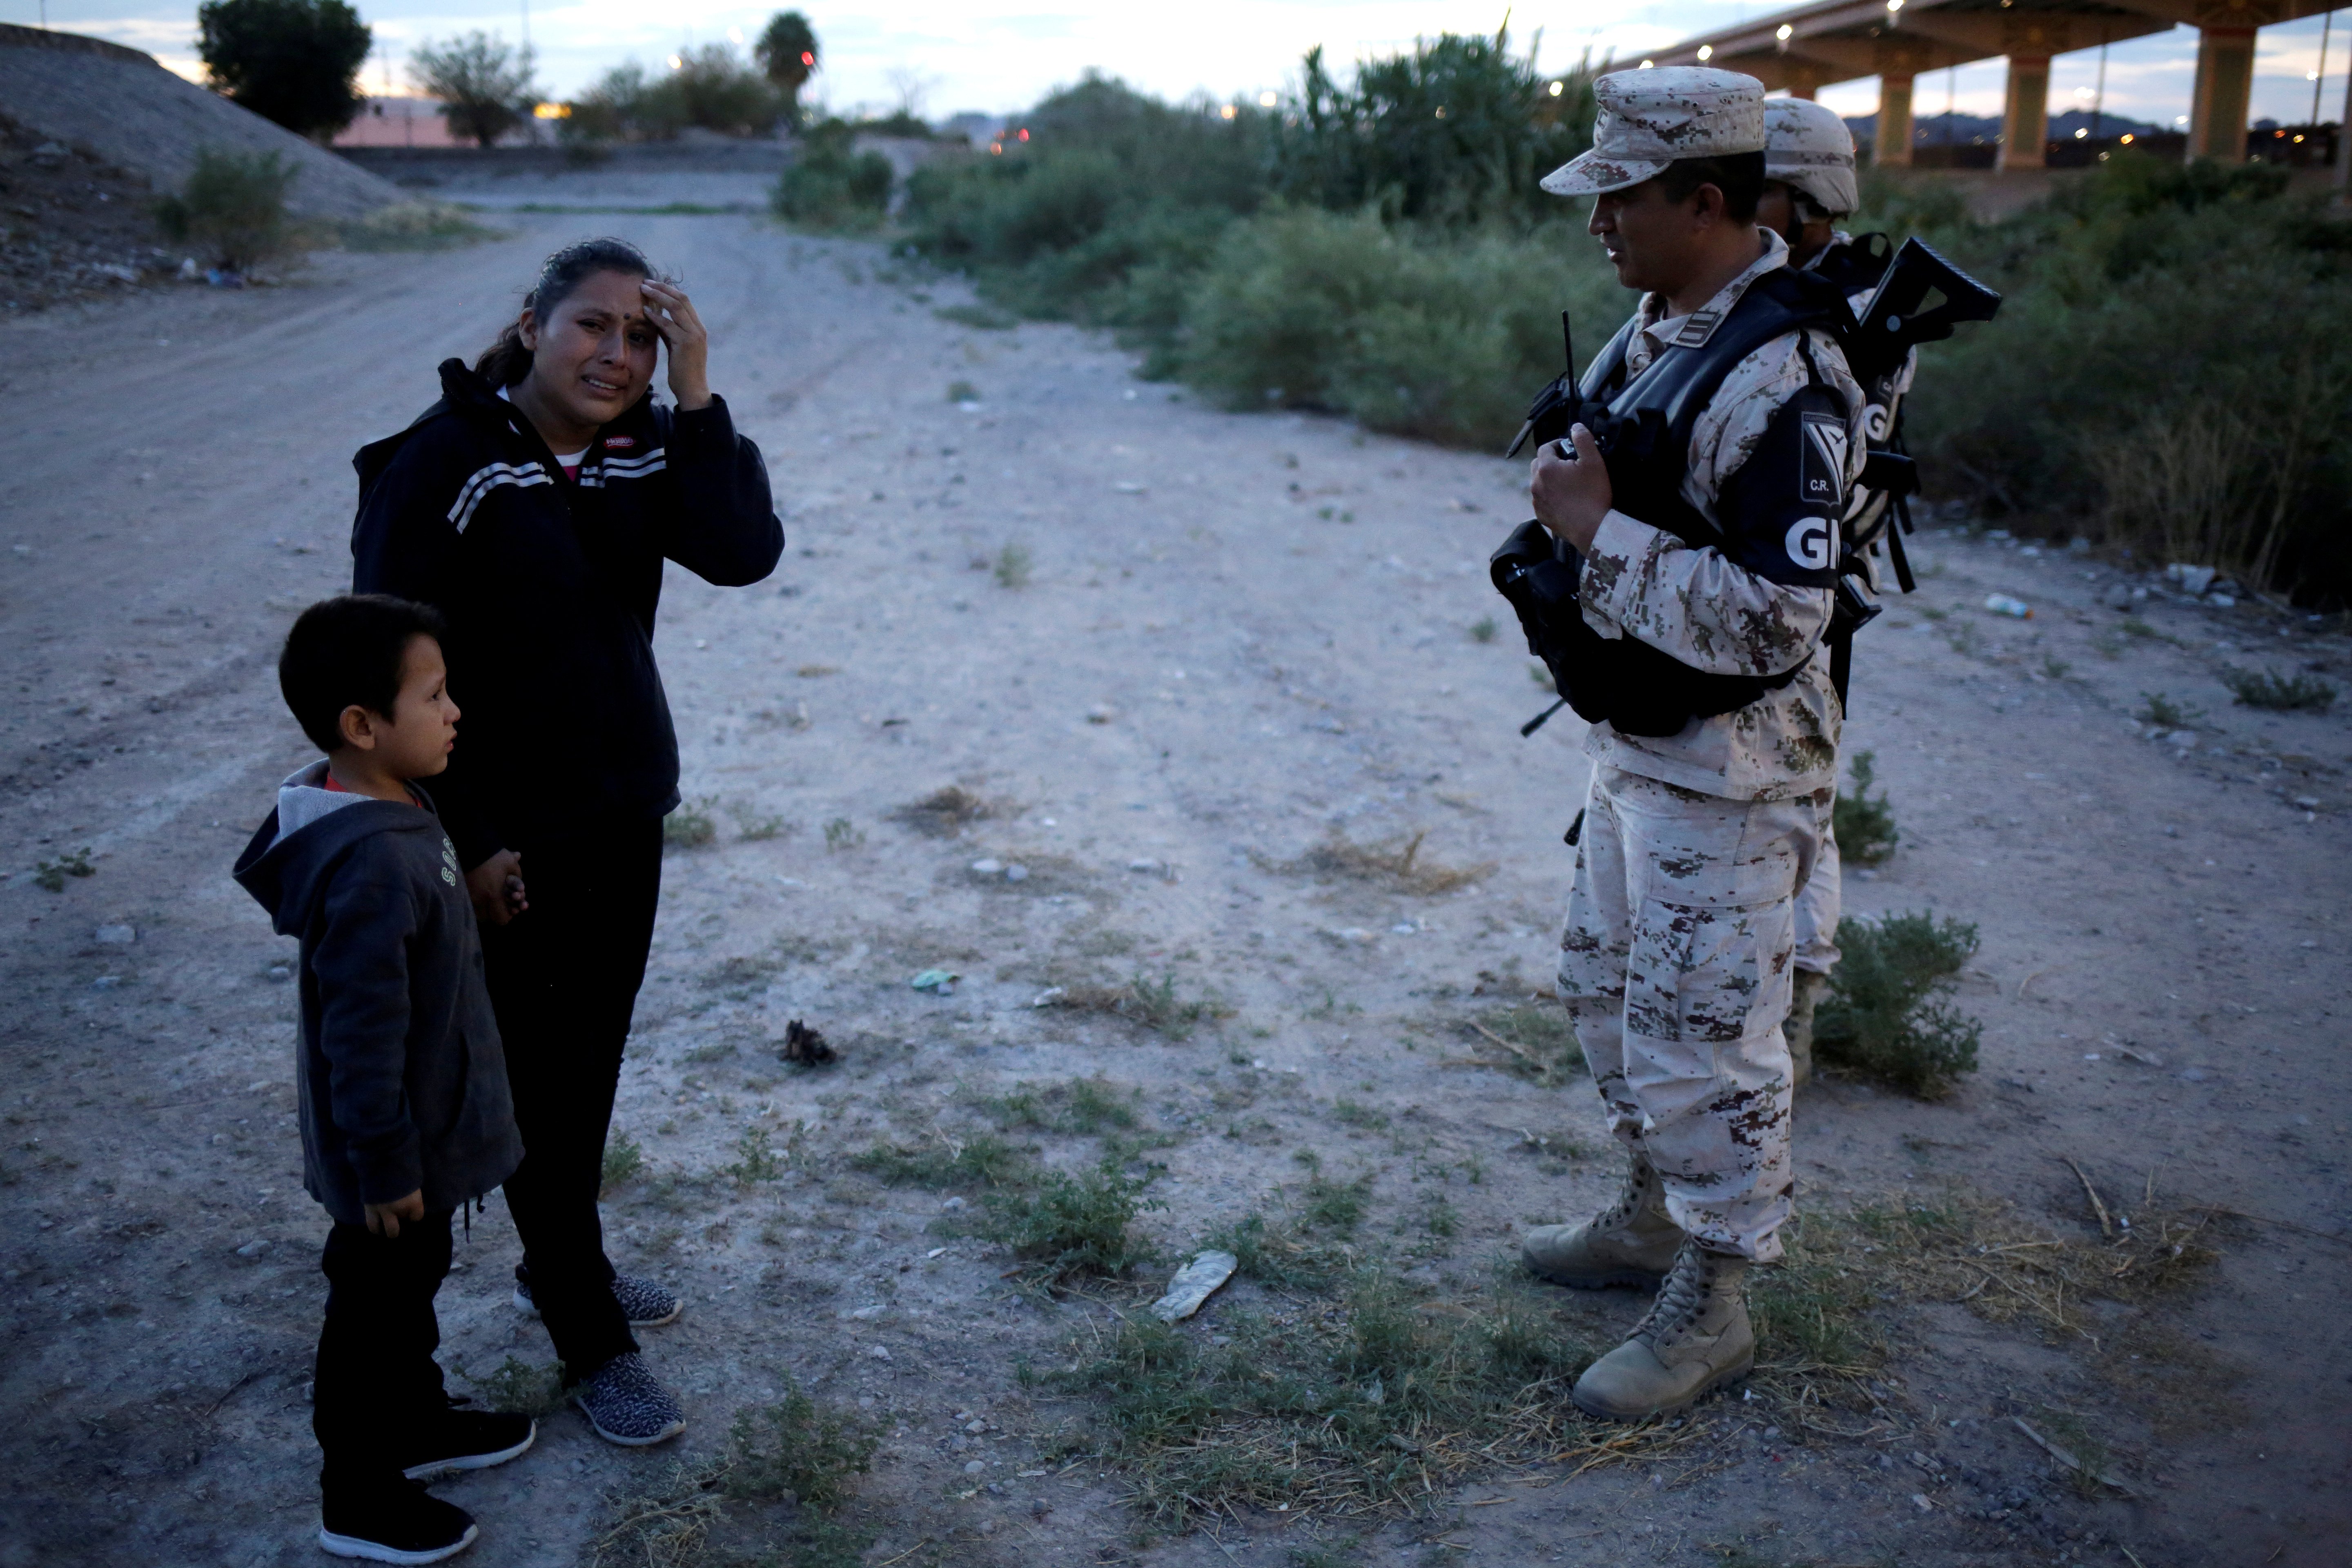 Guatemalan migrant Ledy Perez reacts while holding hands with her son Anthony while asking to members of the Mexican National Guard to let them cross into the United States, as seen from Ciudad Juarez, Mexico July 22, 2019. REUTERS/Jose Luis Gonzalez